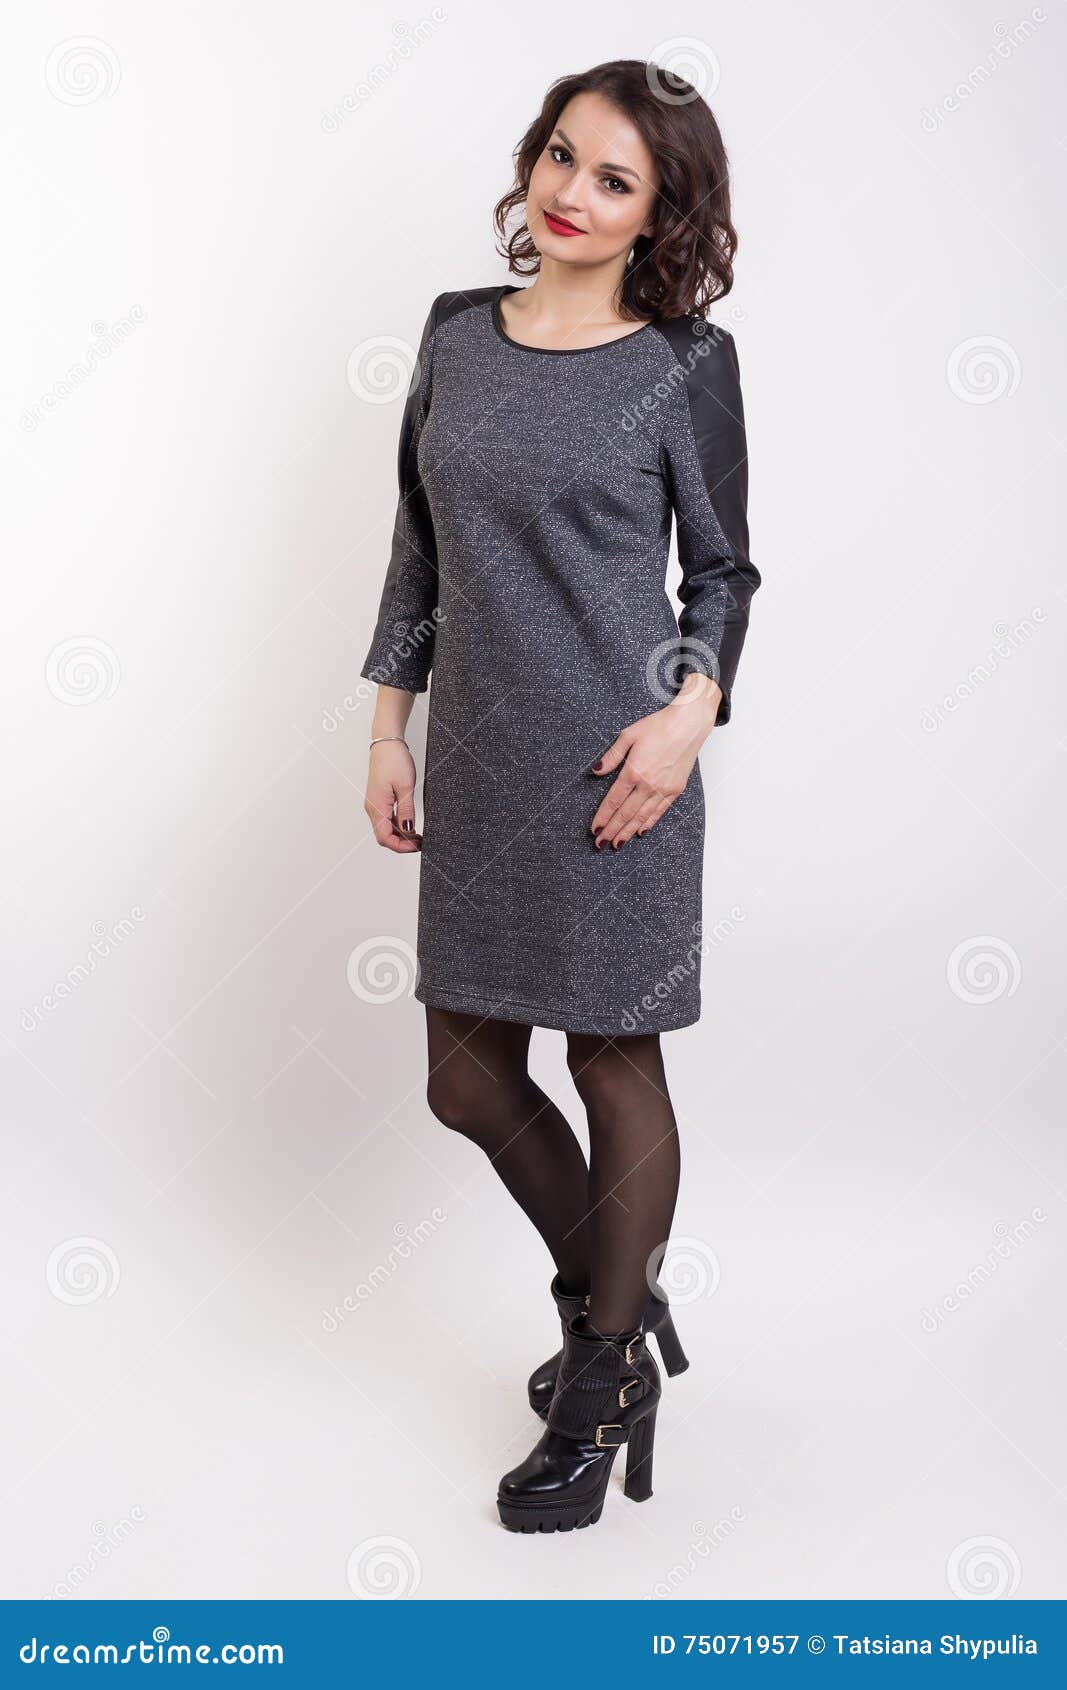 Beautiful Fashionable Girl In A Dress For A Catalog Shoot On A White